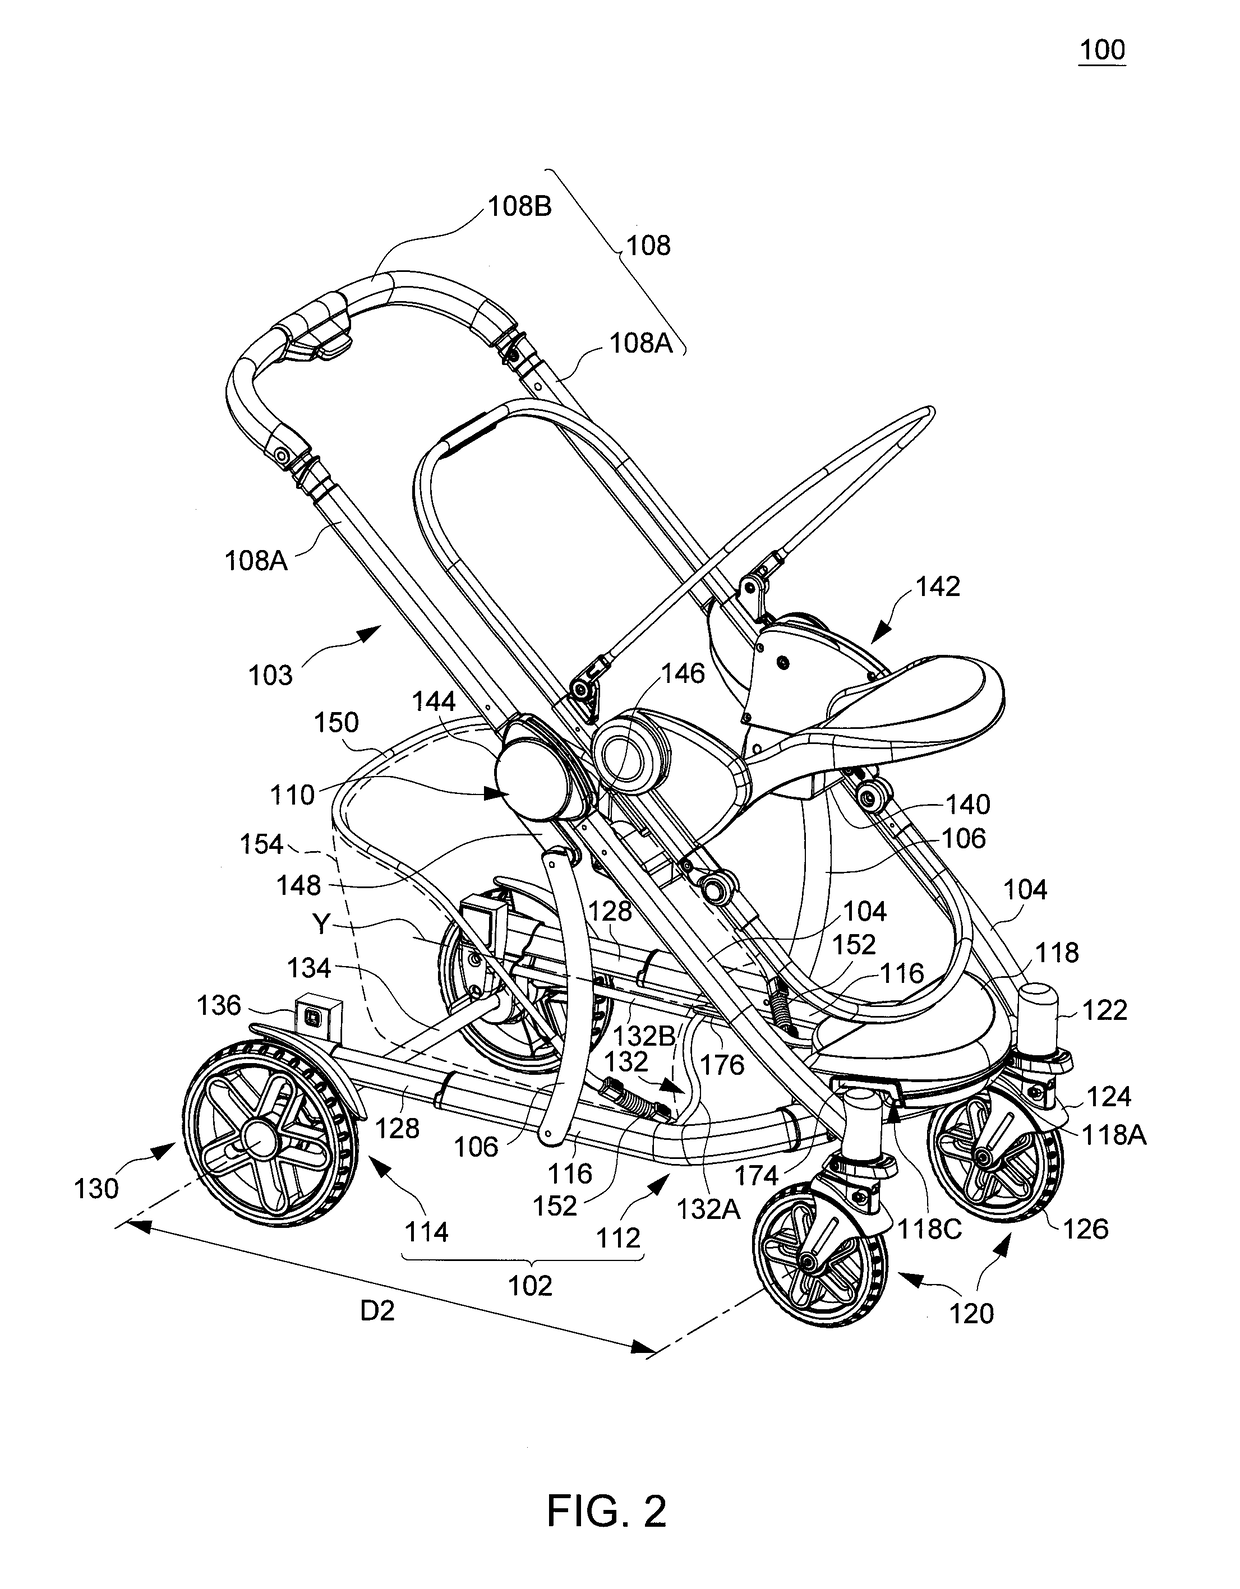 Child stroller apparatus having an expandable frame